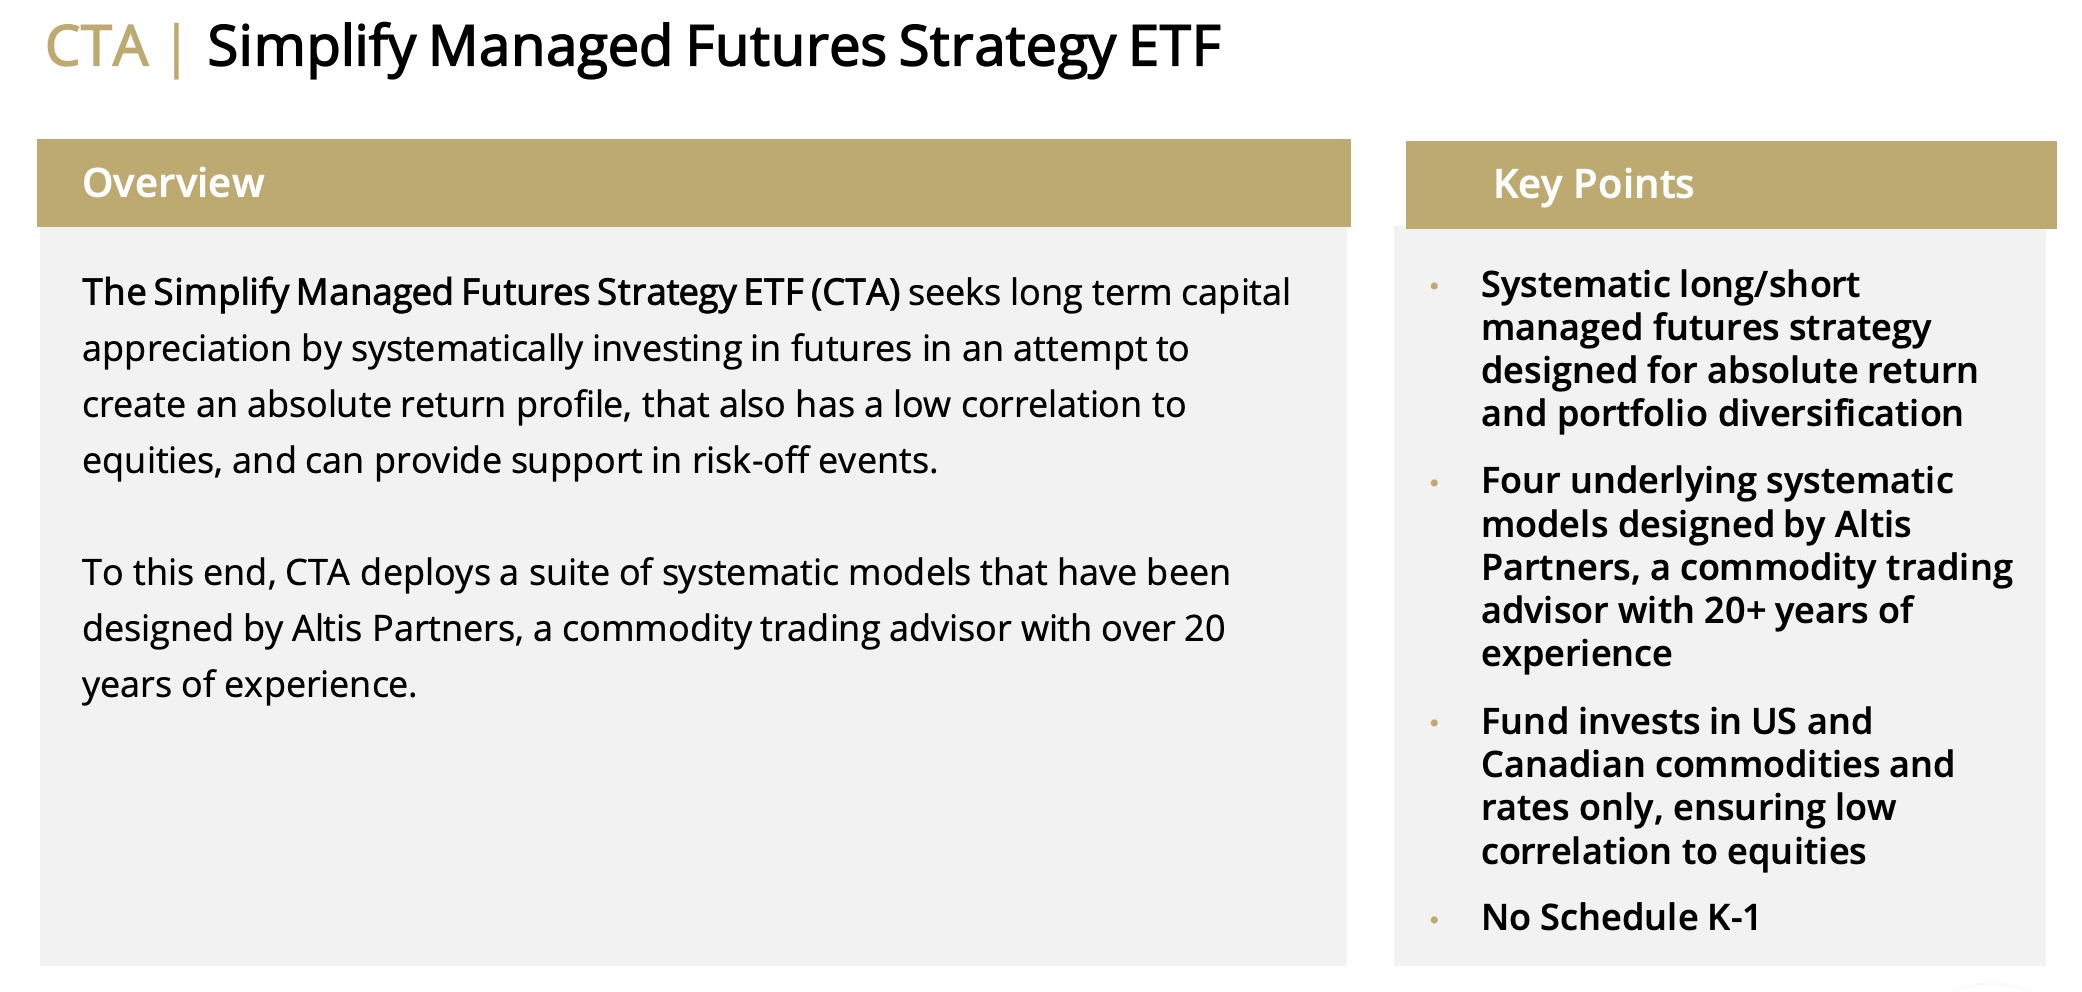 CTA Simplify Managed Futures Strategy ETF Overview and Key Points 